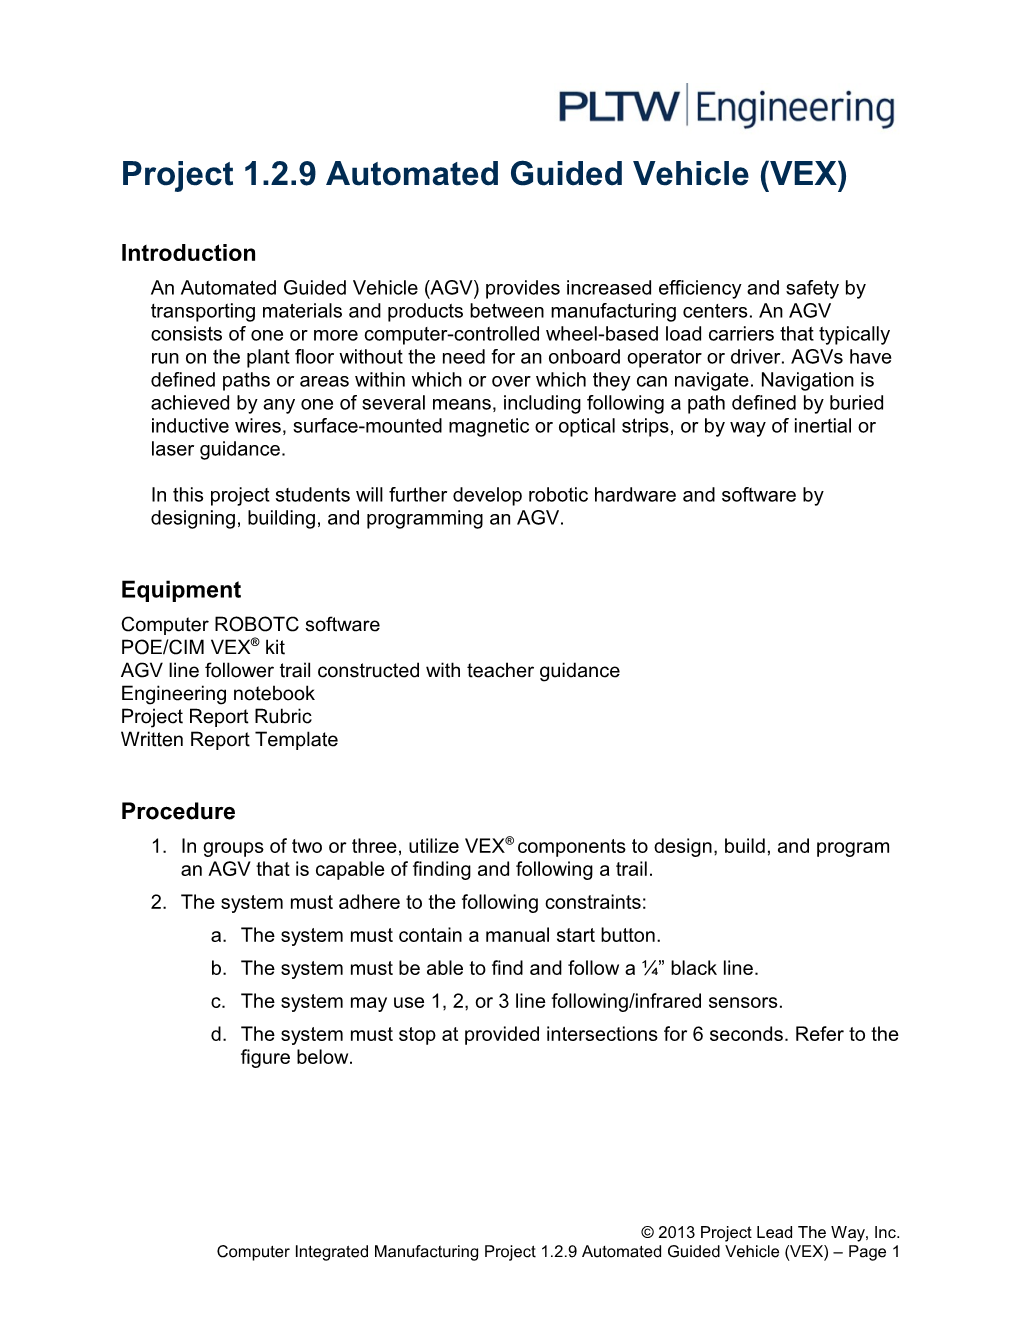 Project 1.2.9 Automated Guided Vehicle (VEX)